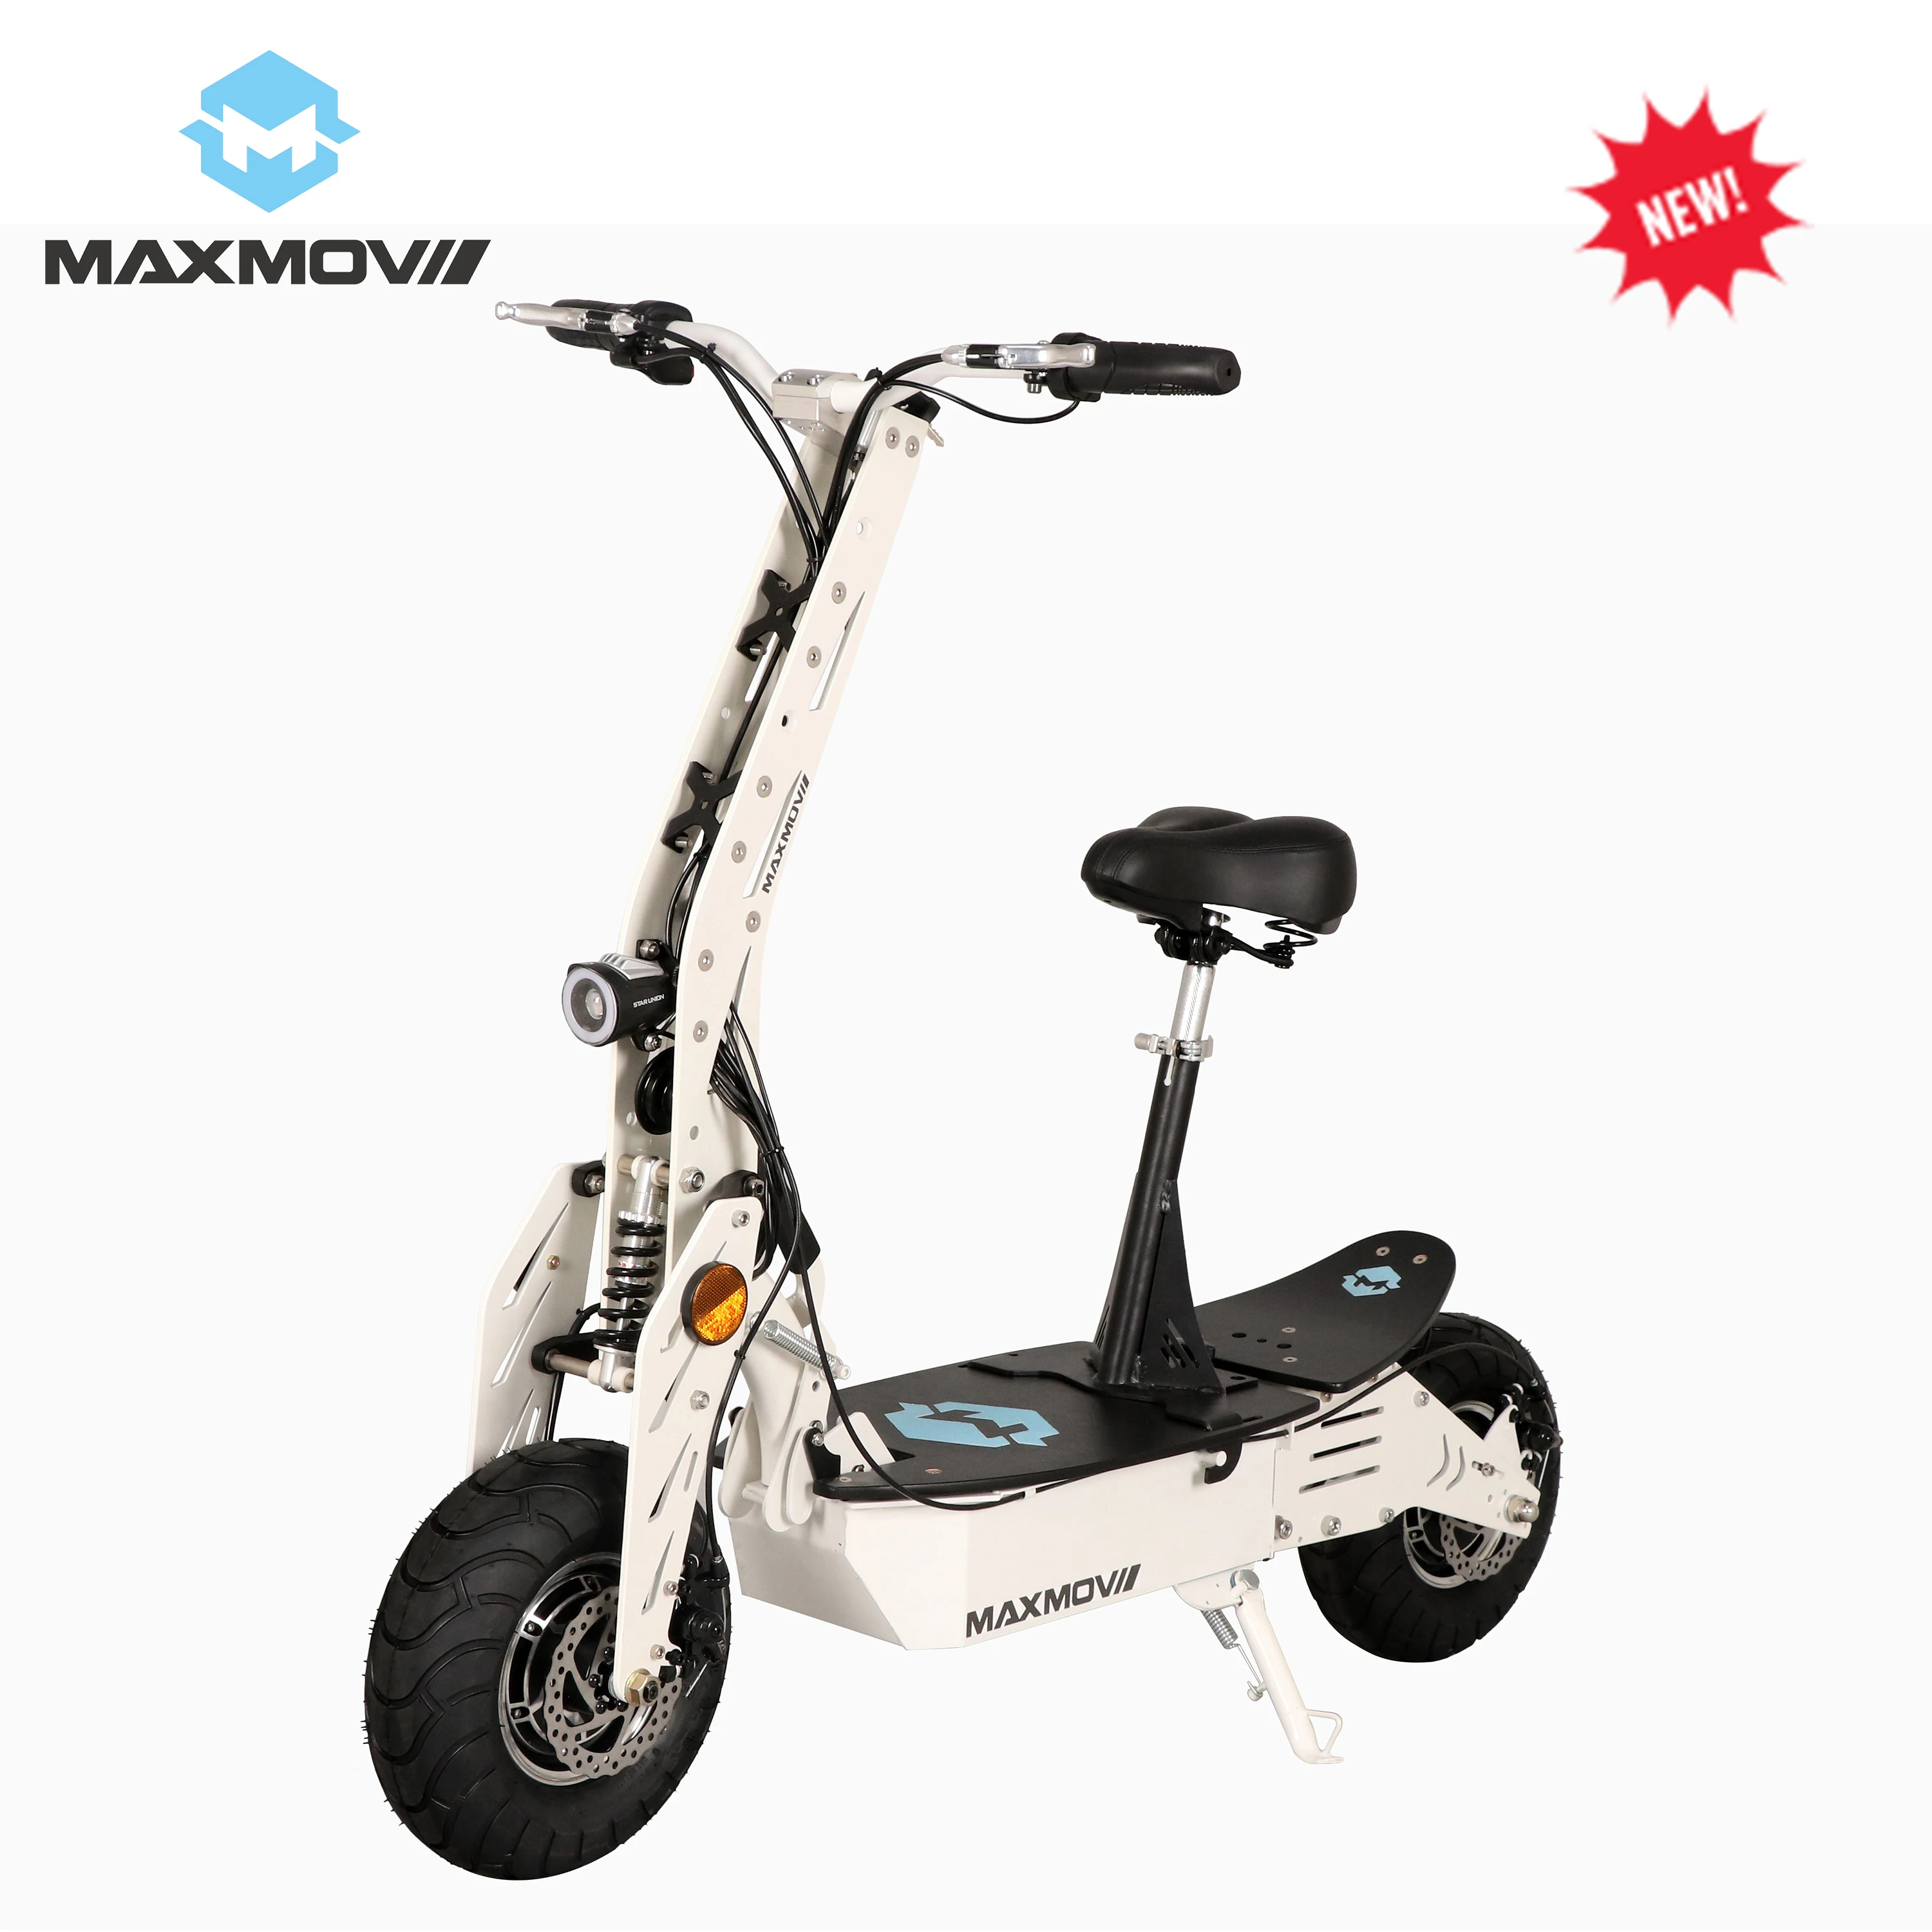 Perfect 2019 Top Seller 2000W 48V 20AH Lithium Battery Powerful Citycoco Electric Motorcycle Scooter with 50KM/h Max Speed 7